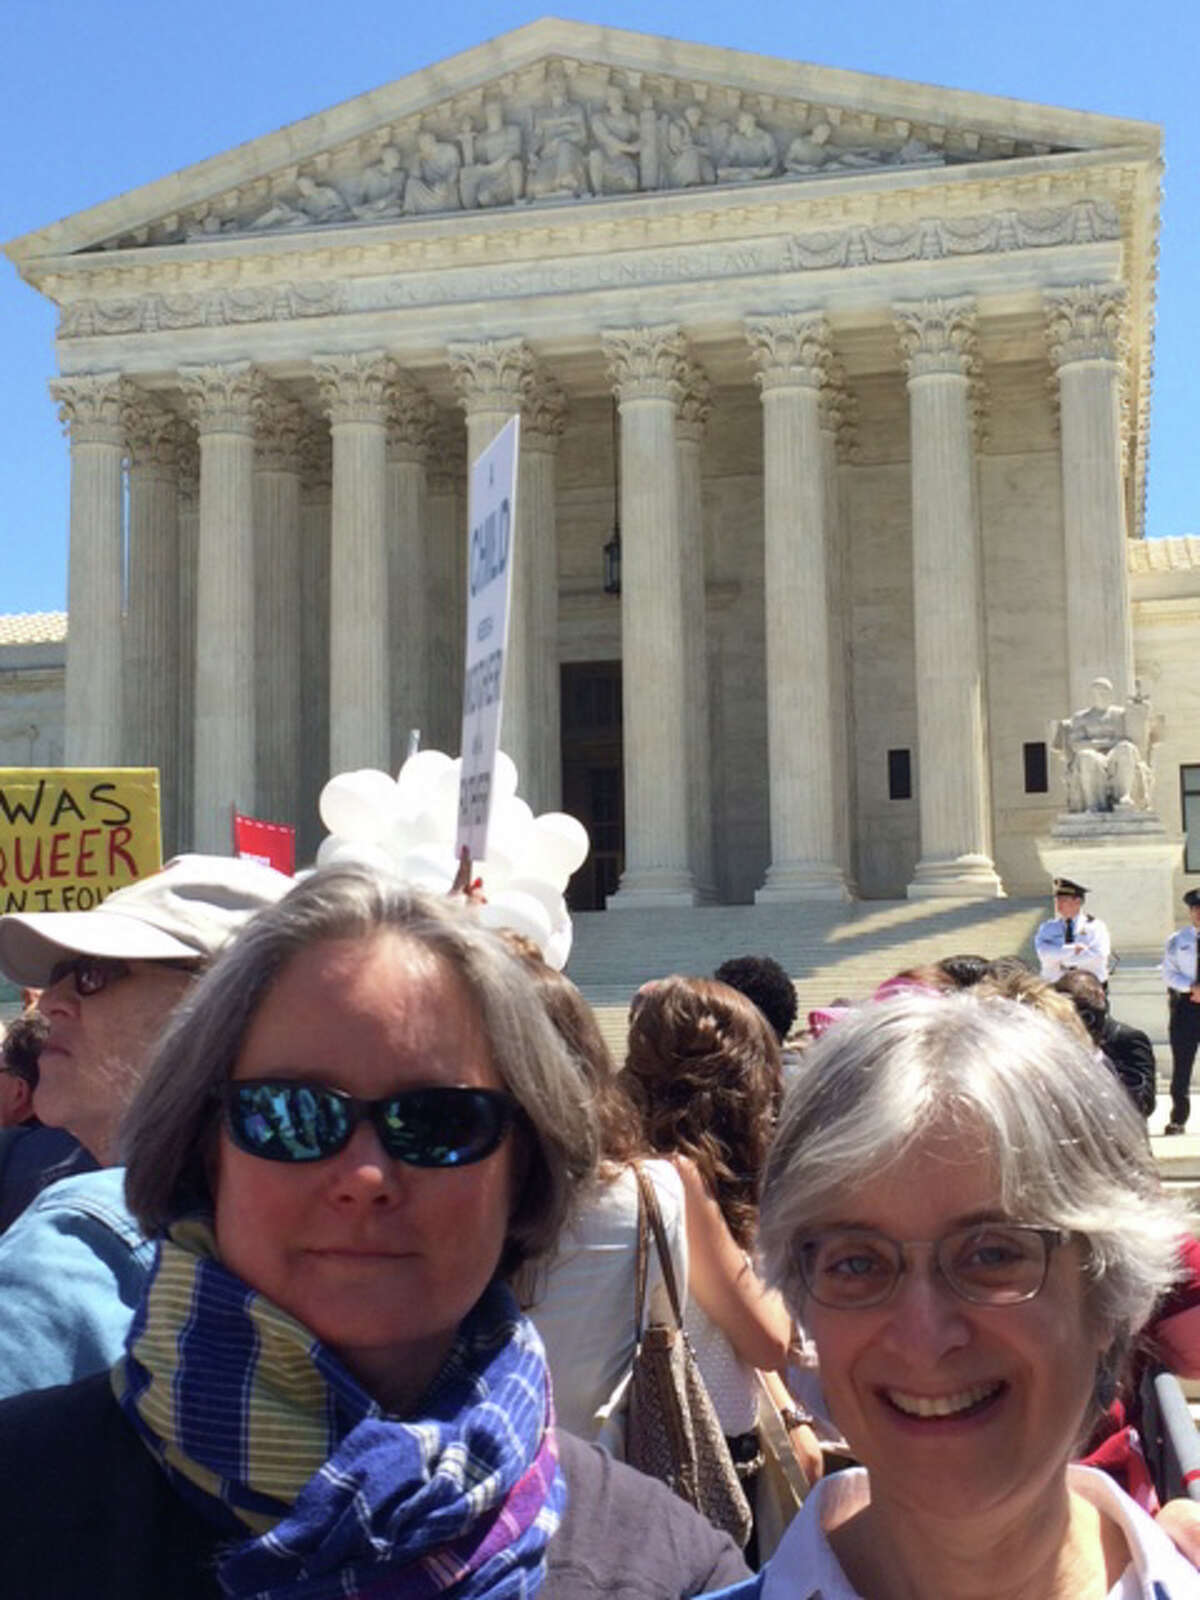 The girlfriend (on the left) and me, in front of the Supreme Court protesters.